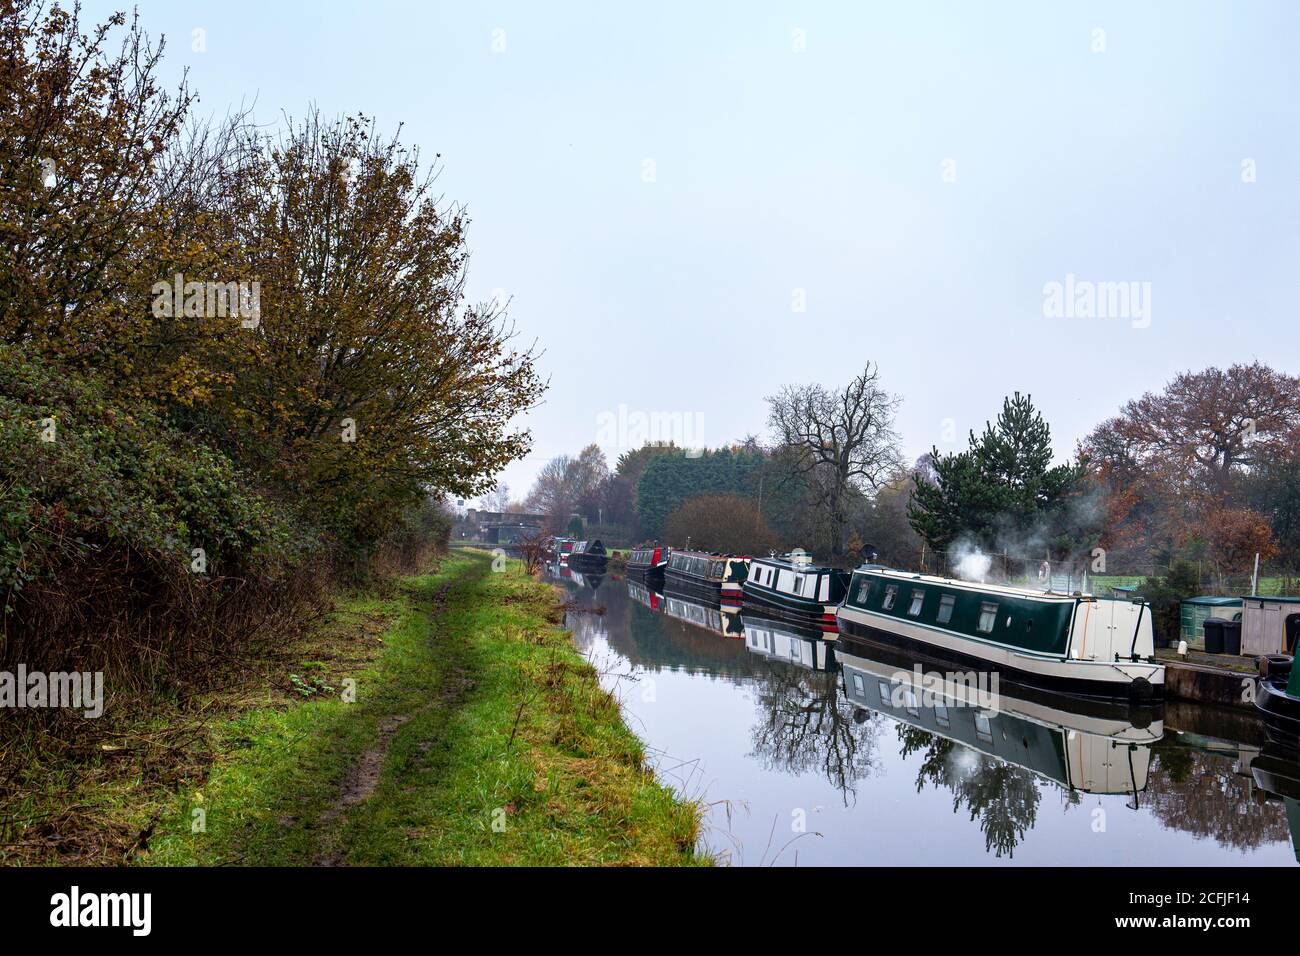 Narrow boats on the Trent and Mersey canal in winter near Sandbach Cheshire UK Stock Photo